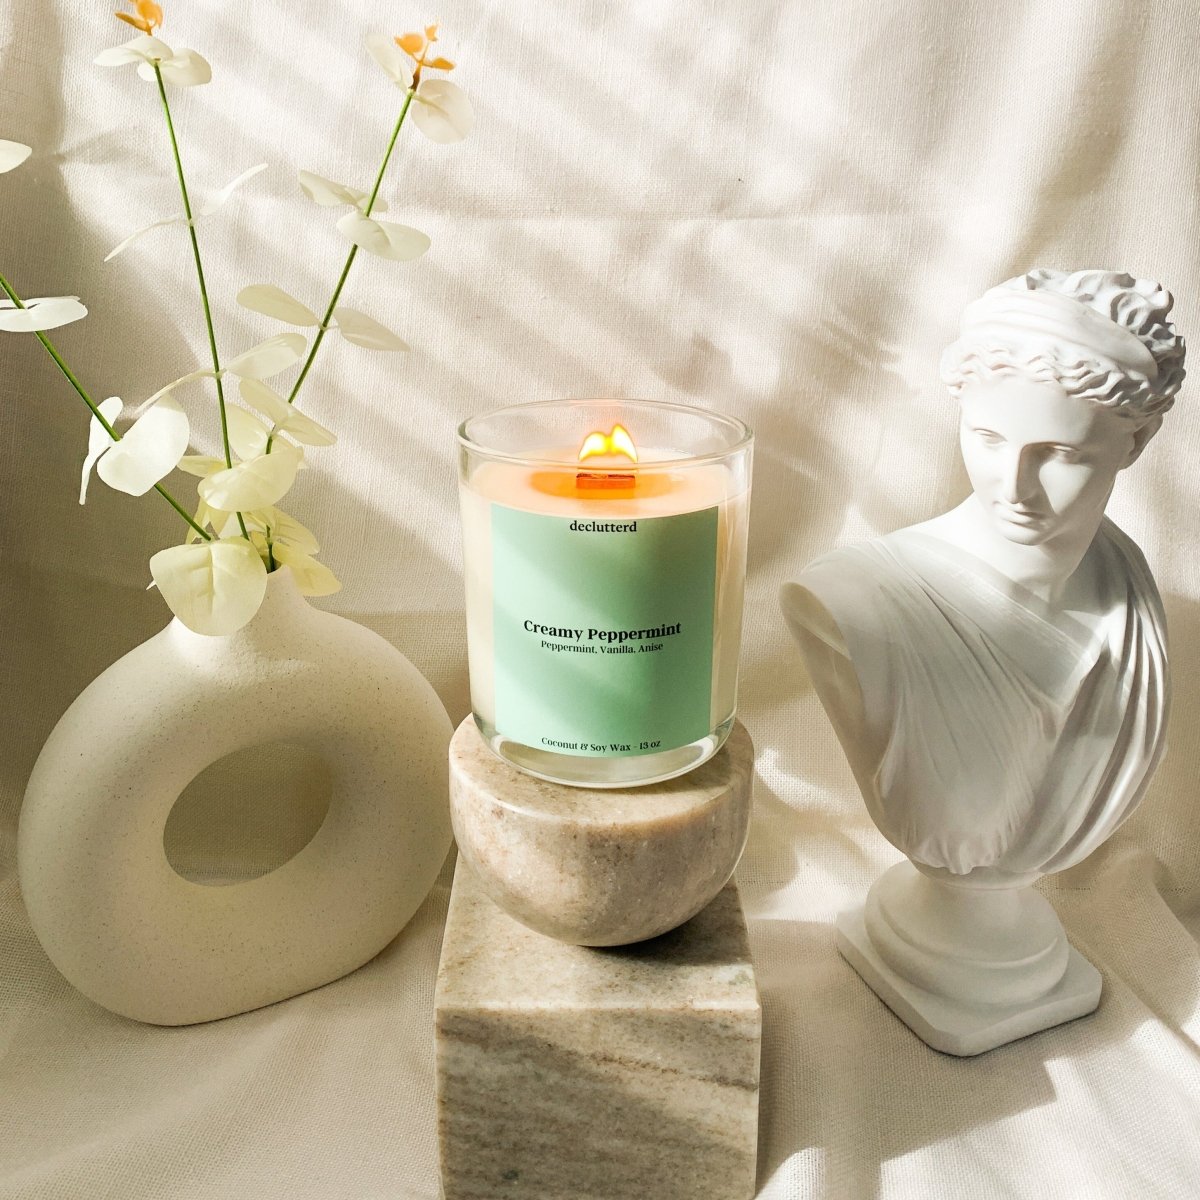 declutterd Creamy Peppermint Wood Wick Candle - lily & onyx